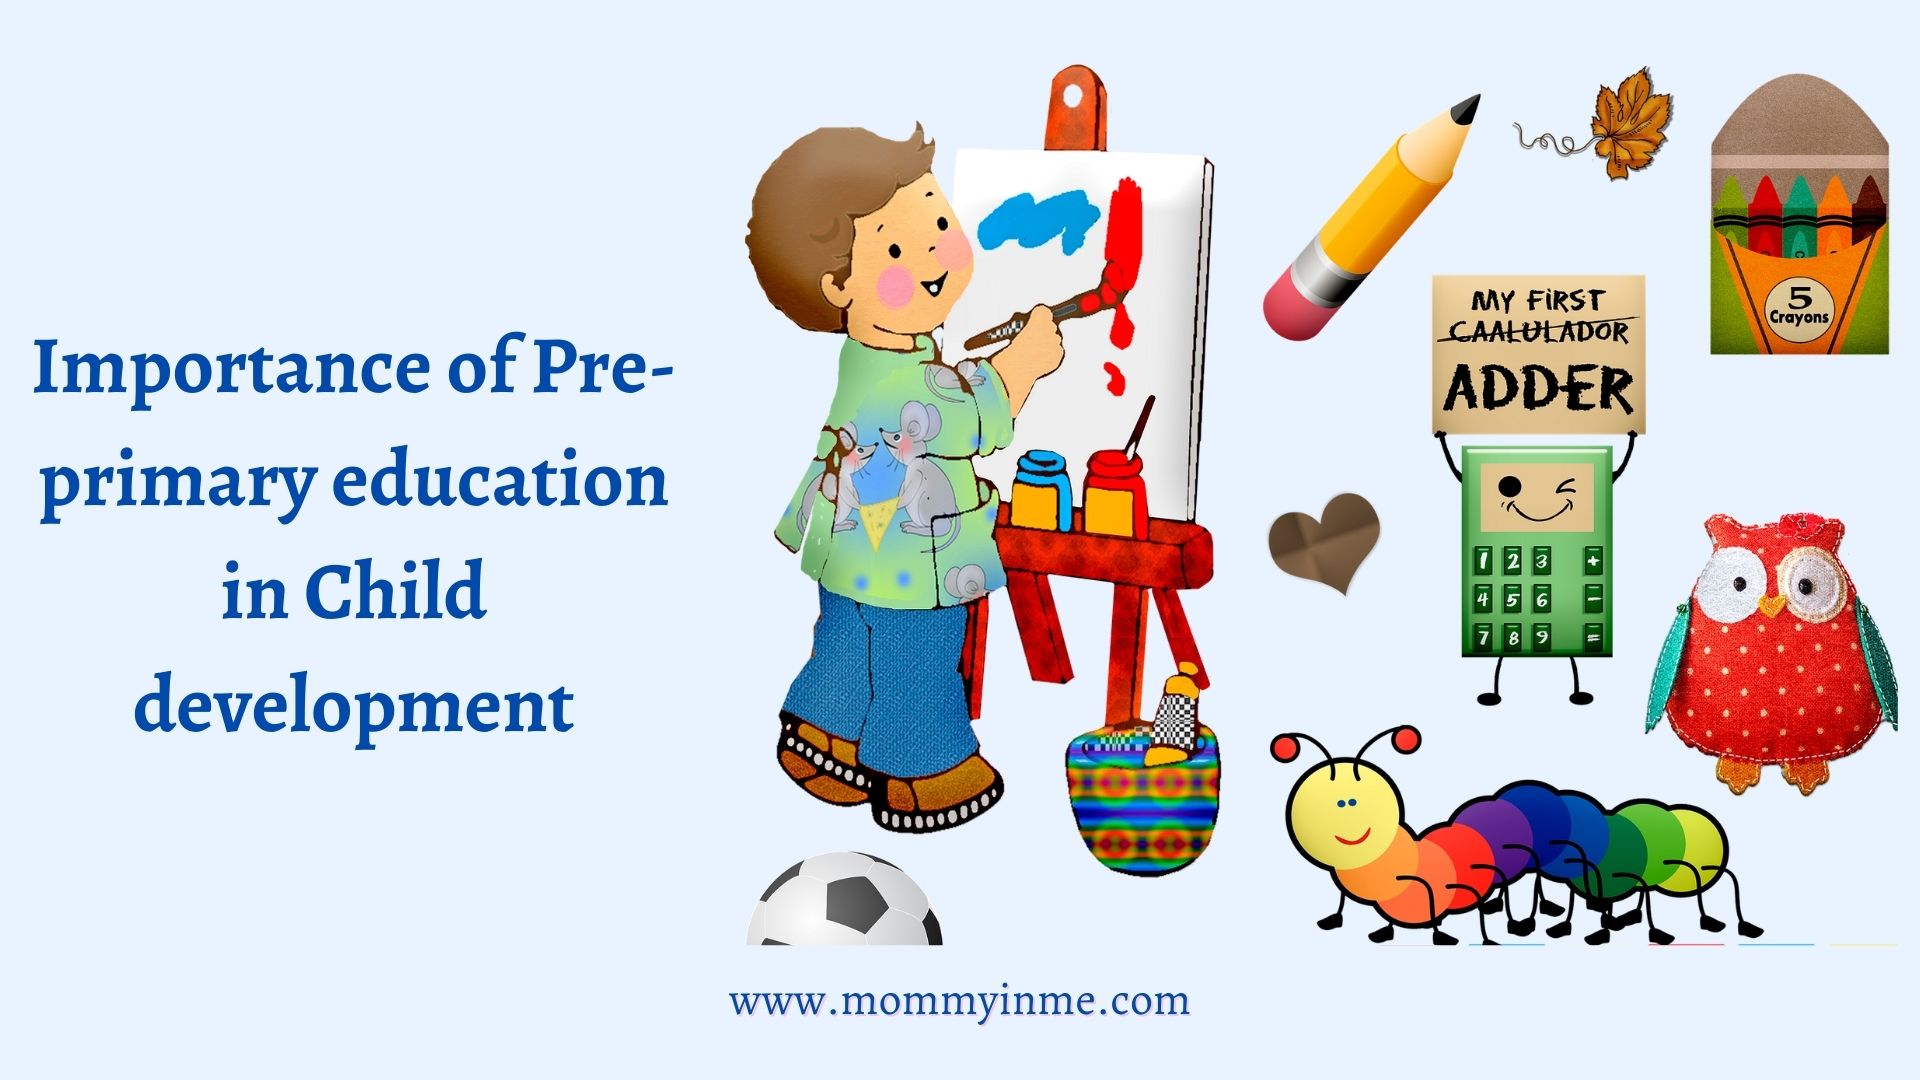 Importance of Pre-primary education in Child development